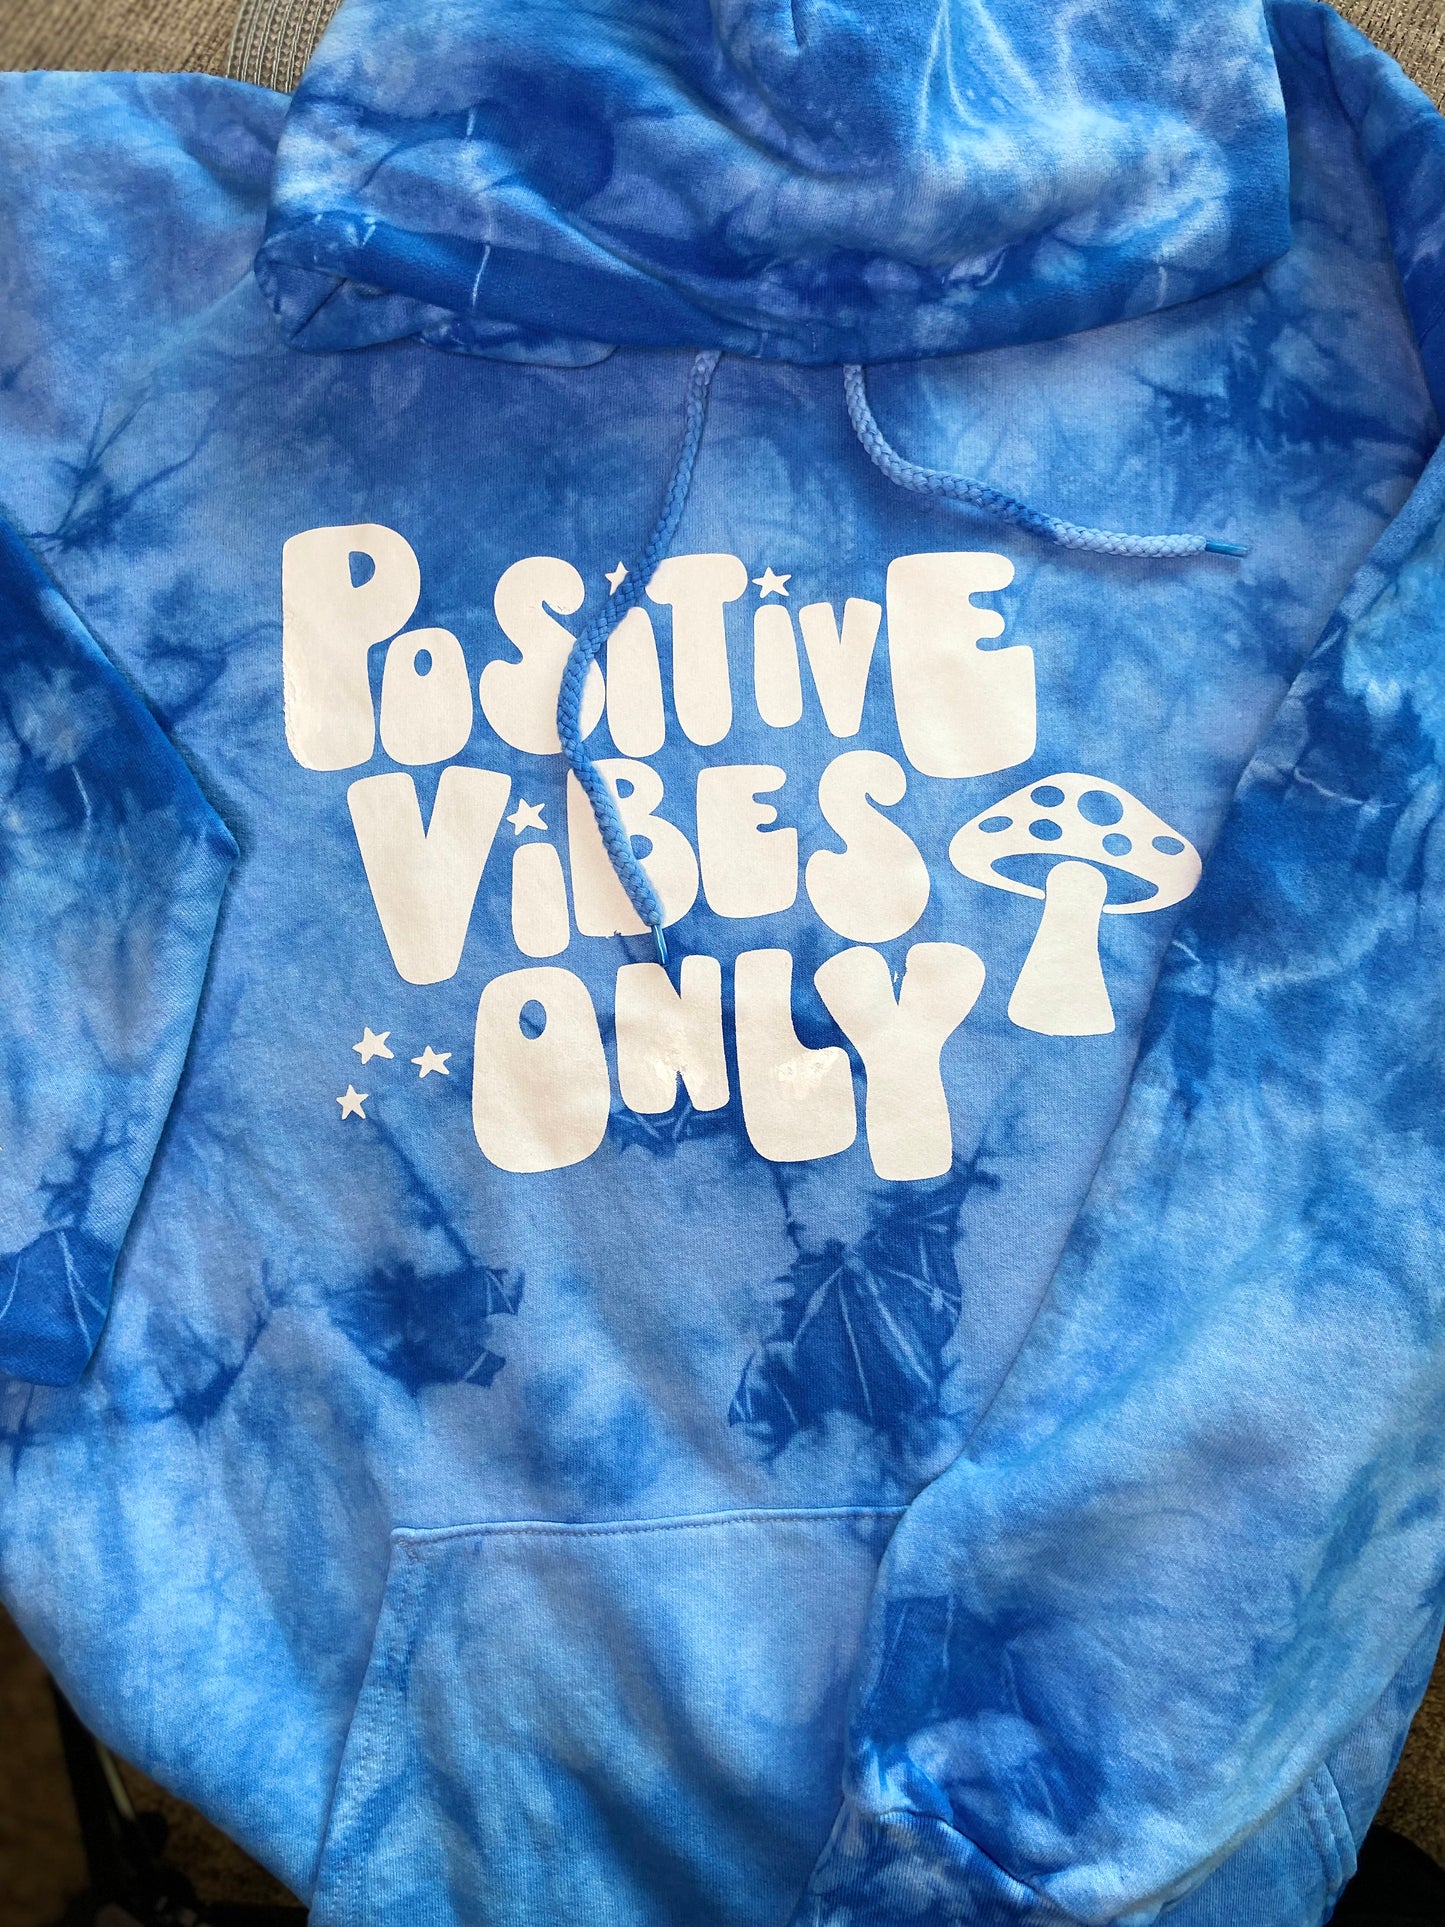 Positive Vibes Only Blue Tie Dye Hoodie Shirt, Trendy Shirt, Mushroom Vibes Hoodie  Good Vibes Only Shirt Trend Shirt, gift for her